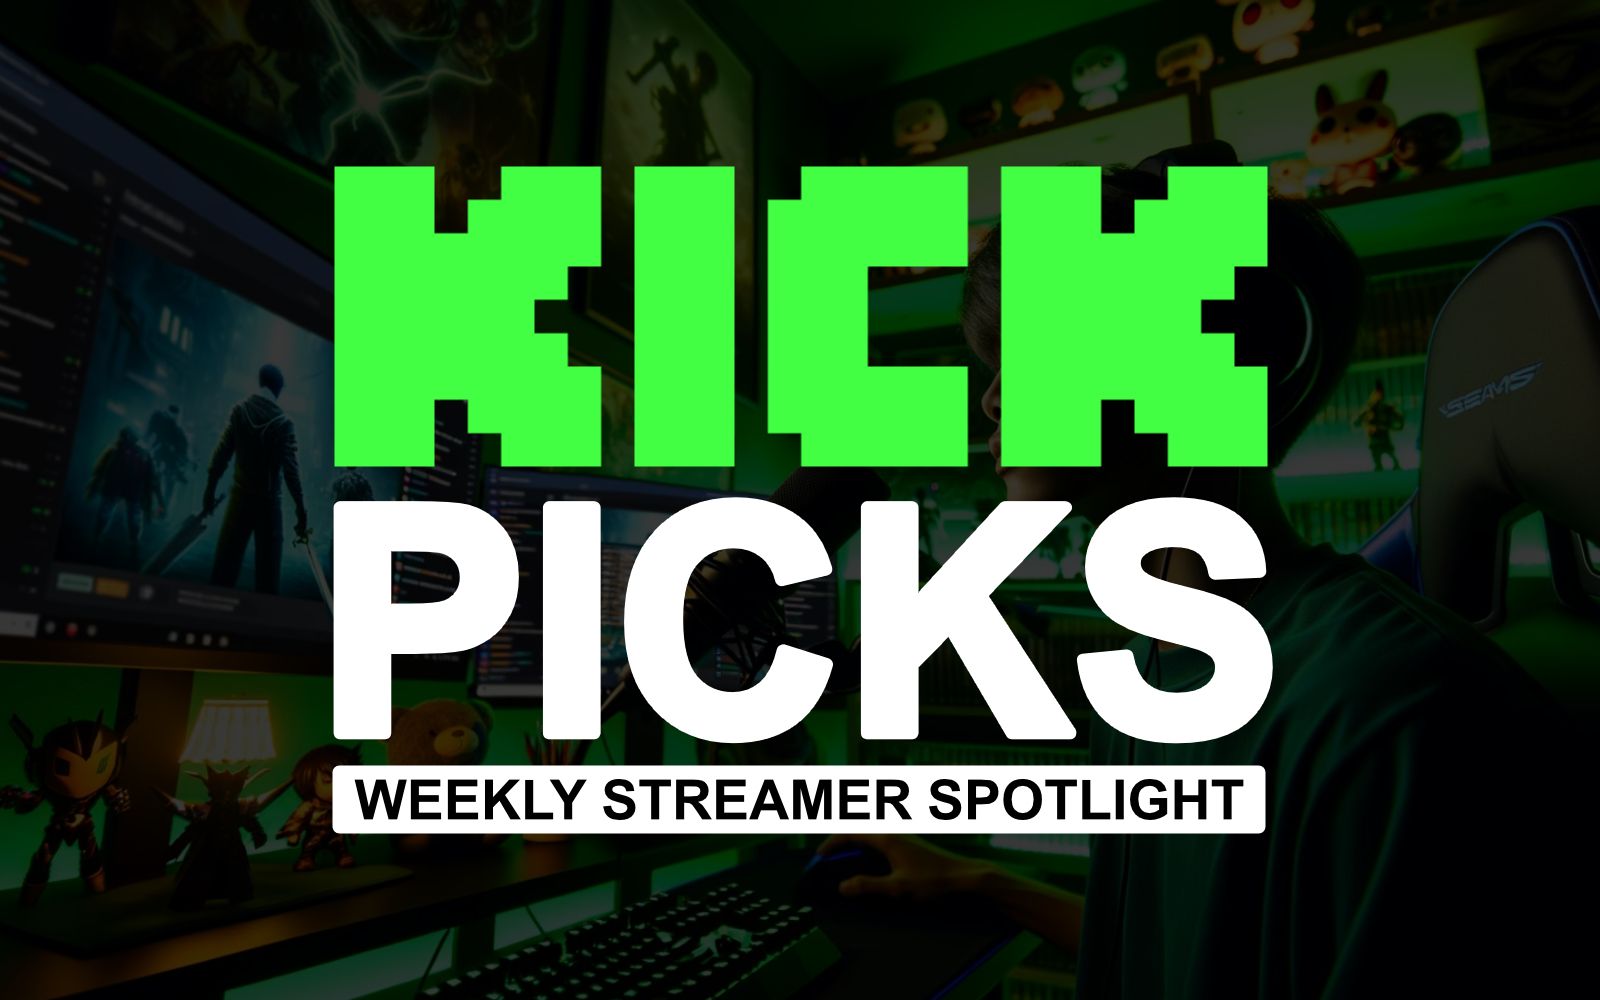 article image showing a kick streamer in a green streaming room with the text kick picks weekly streamer spotlight